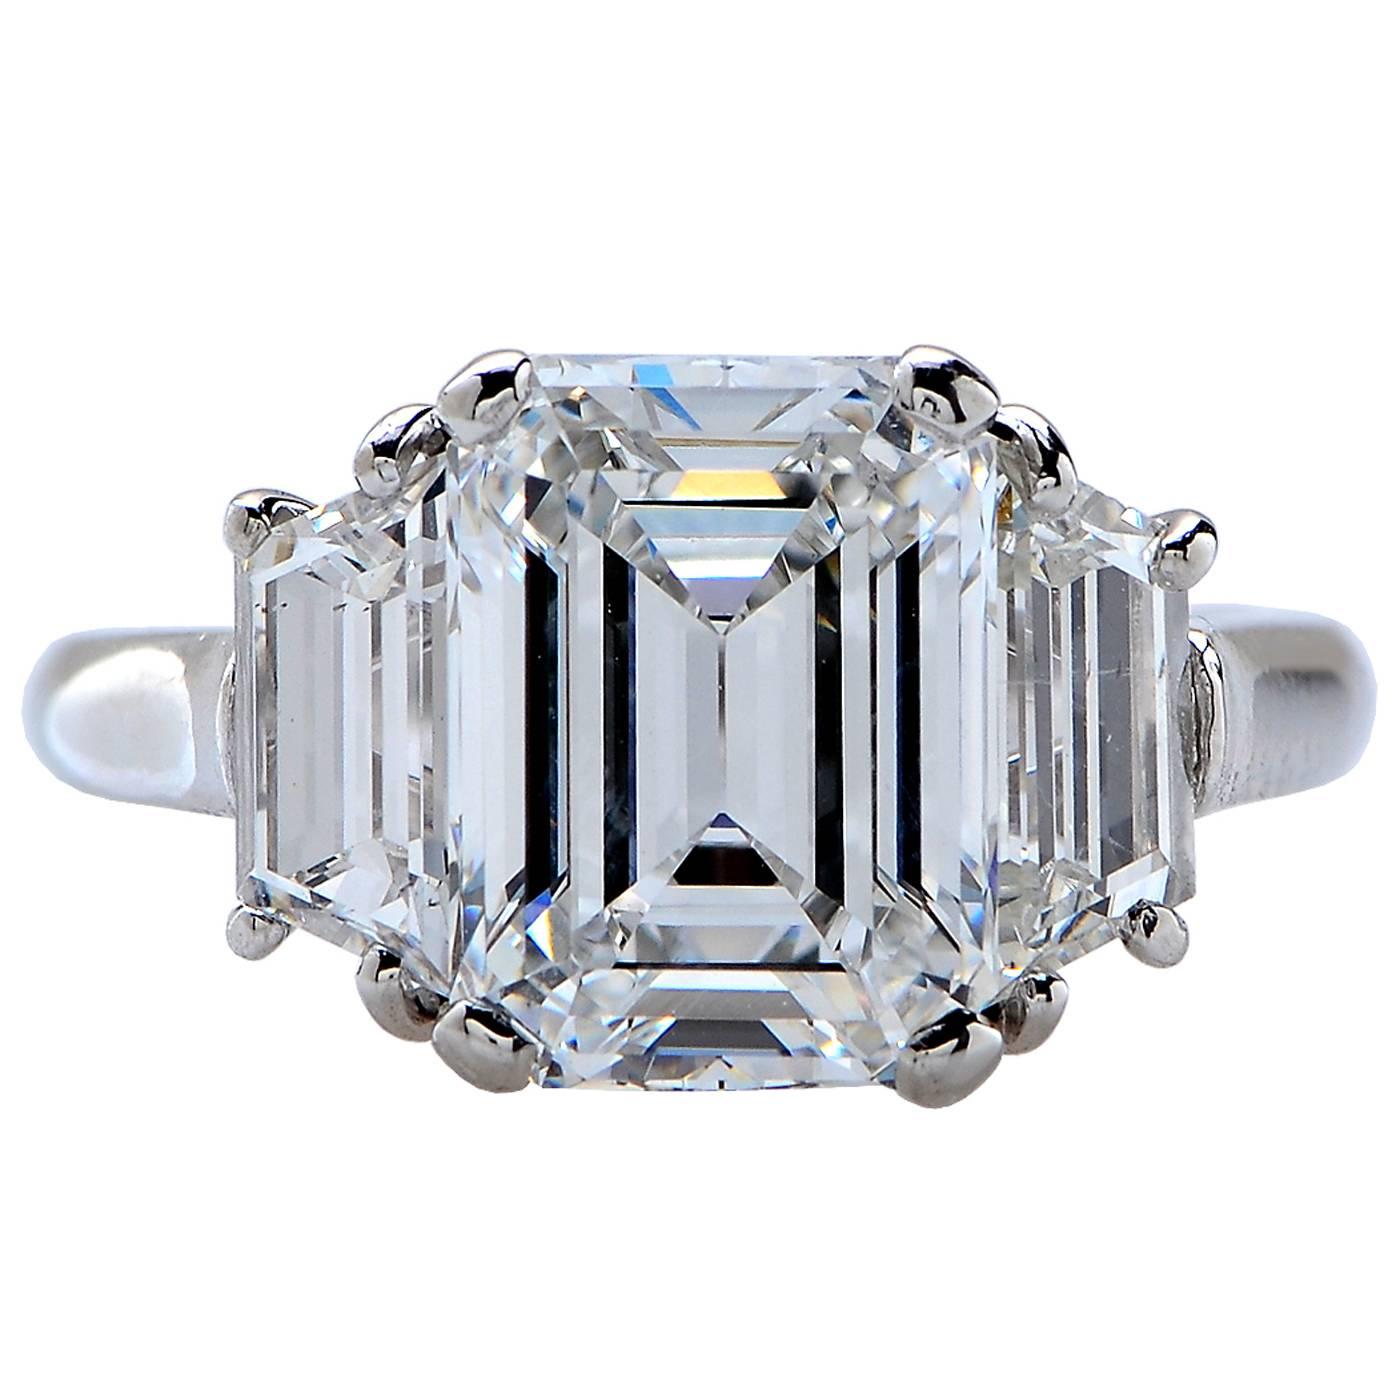 Platinum Ring Containing a 3.95 Carat E VS1 GIA Emerald Cut Diamond Flanked by Trapezoids Weighing Approximately 1.50 Carats Signed Webb.